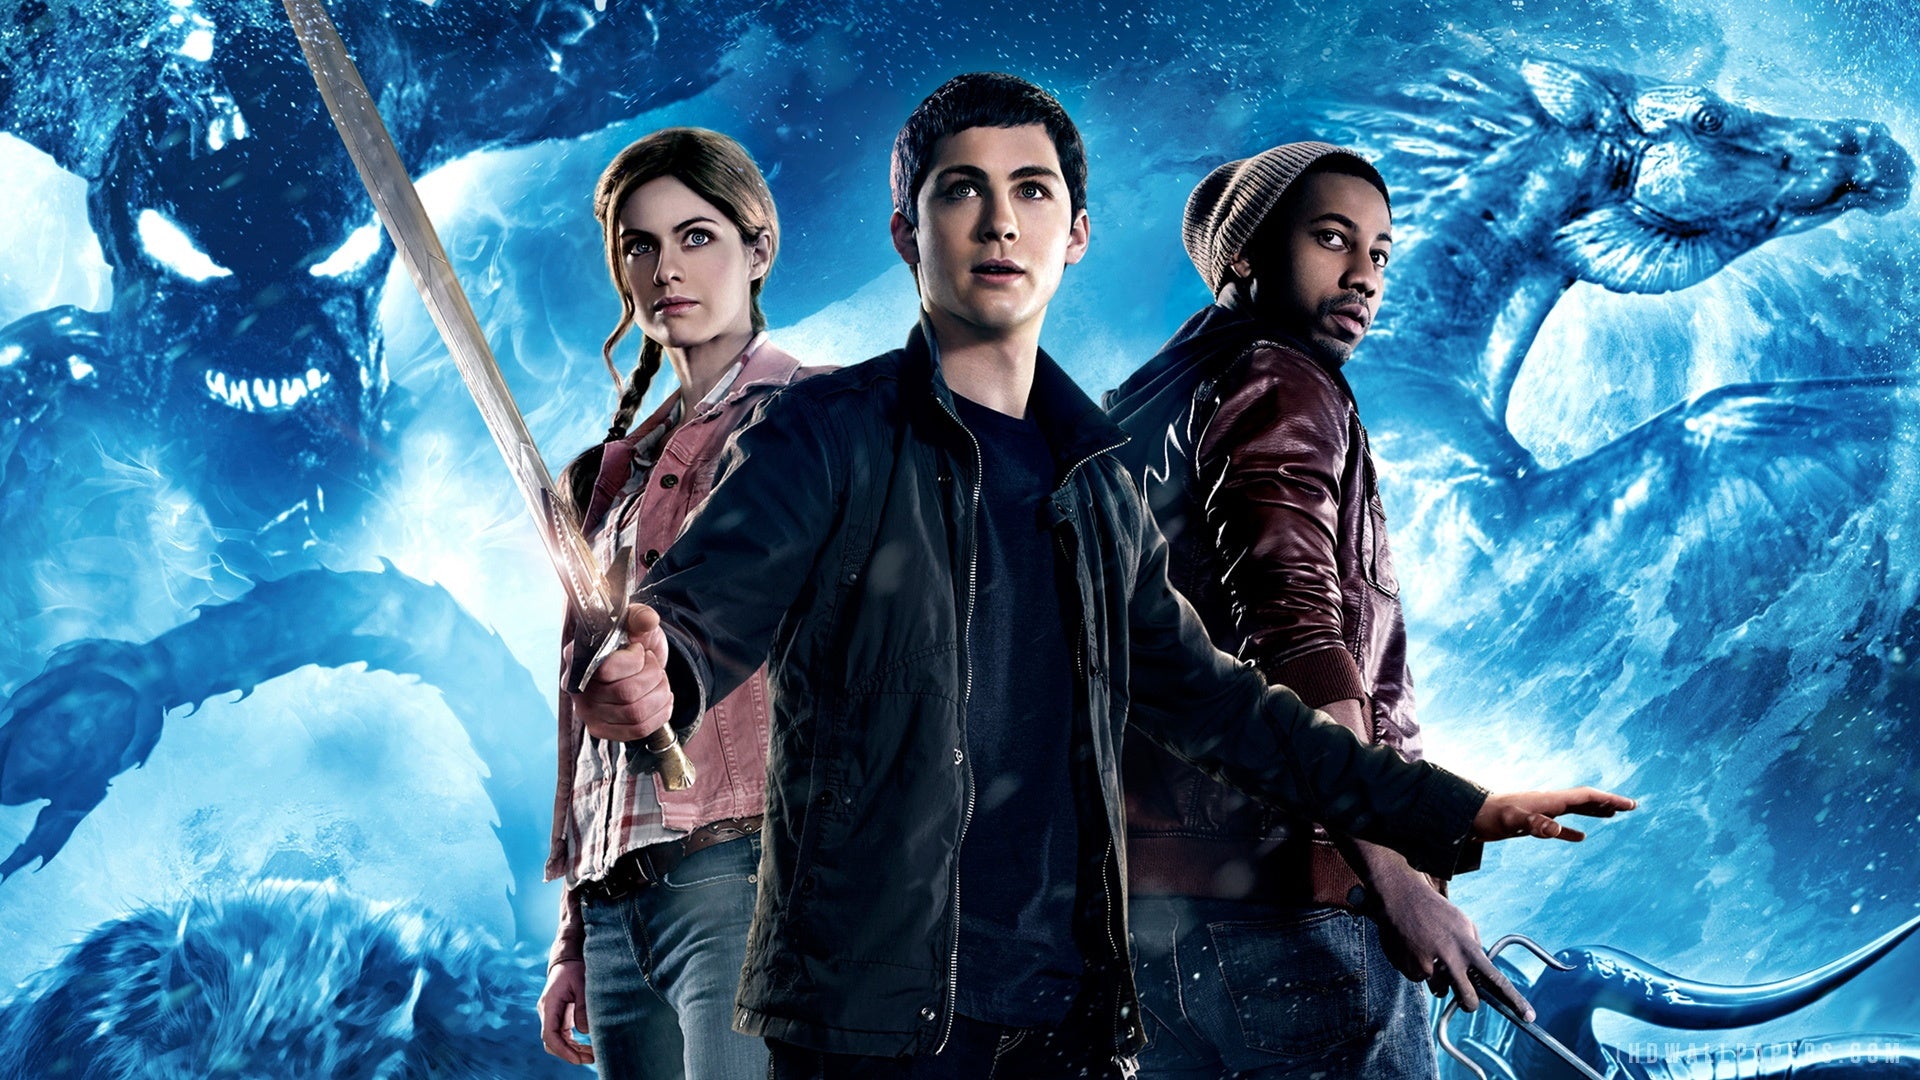 Percy Jackson Double Feature